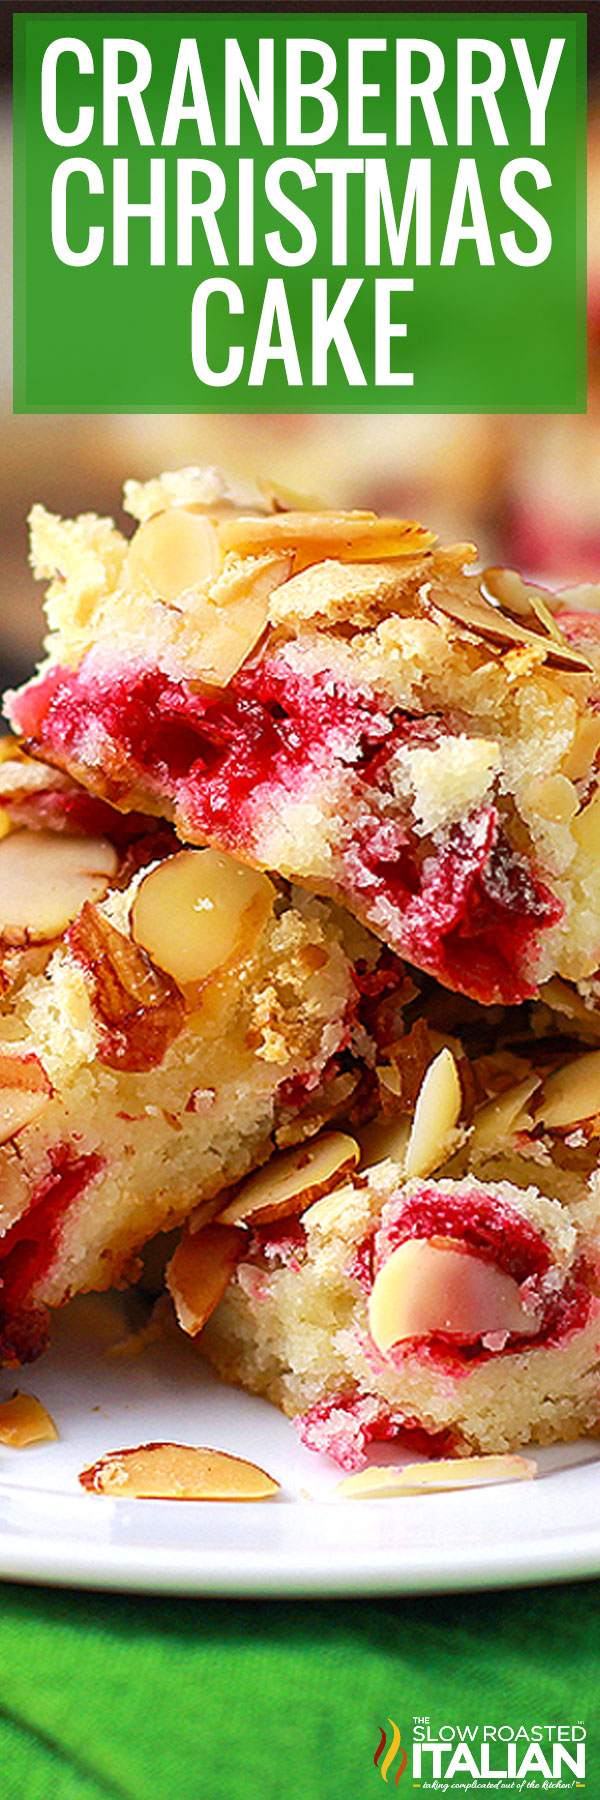 titled image (and shown): cranberry Christmas cake